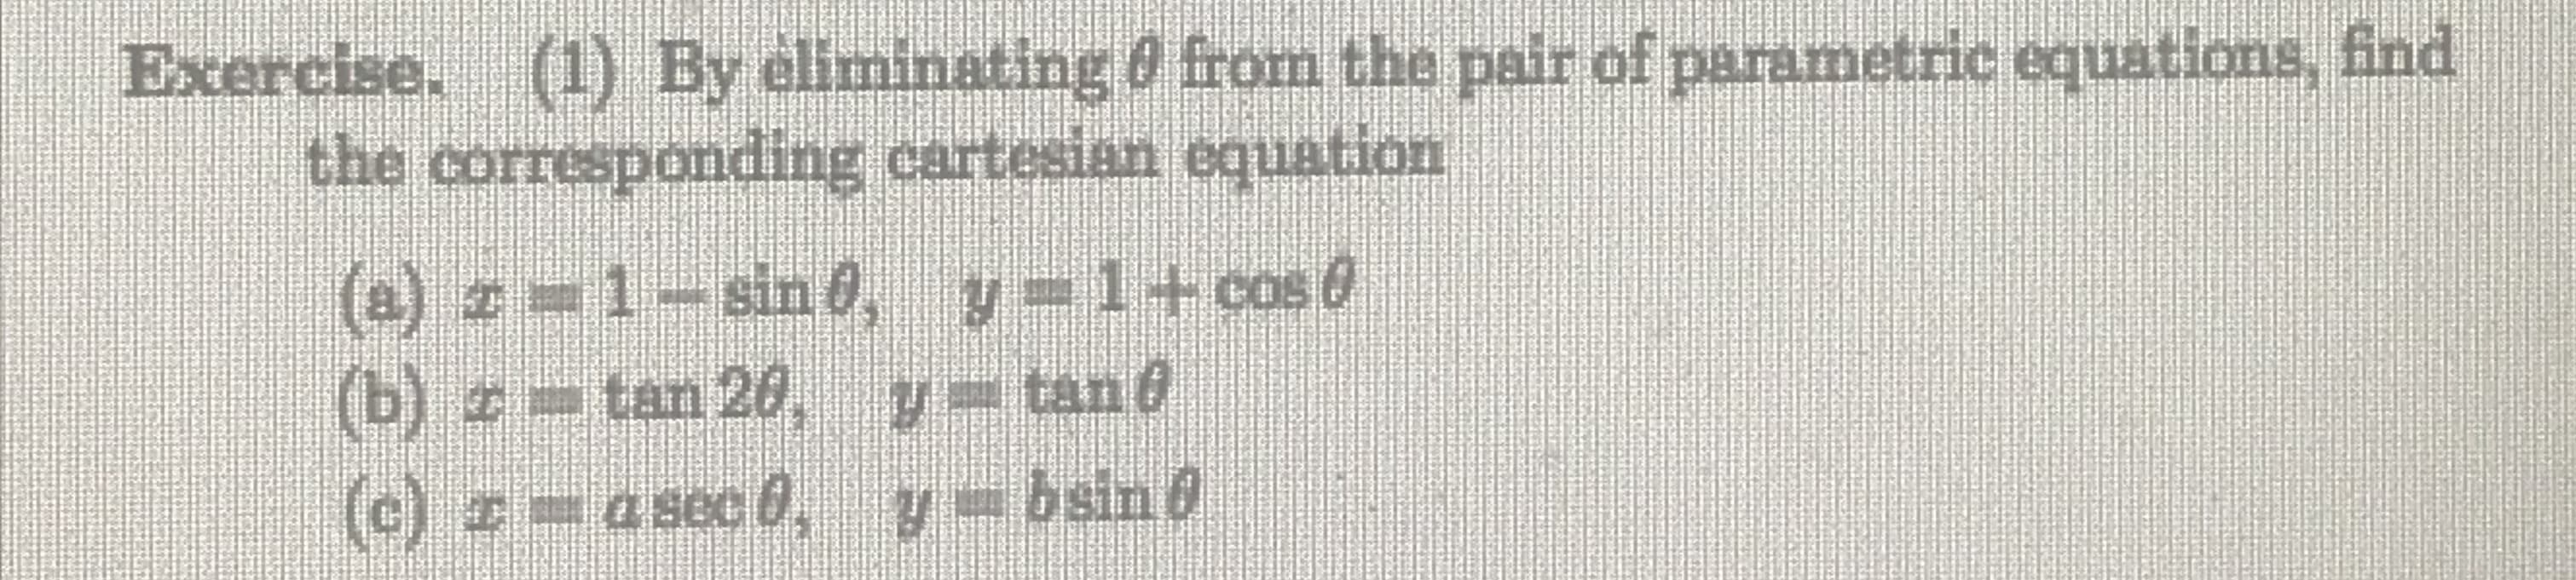 Exercise. (1) By eliminating 0 from the pair of parametric equations, find
the corresponding cartesian equation
(a) z=1-sin0, y 1+cos @
(b) =tan 20, y-tand
(c) =a sec 0, y- bsin 8
